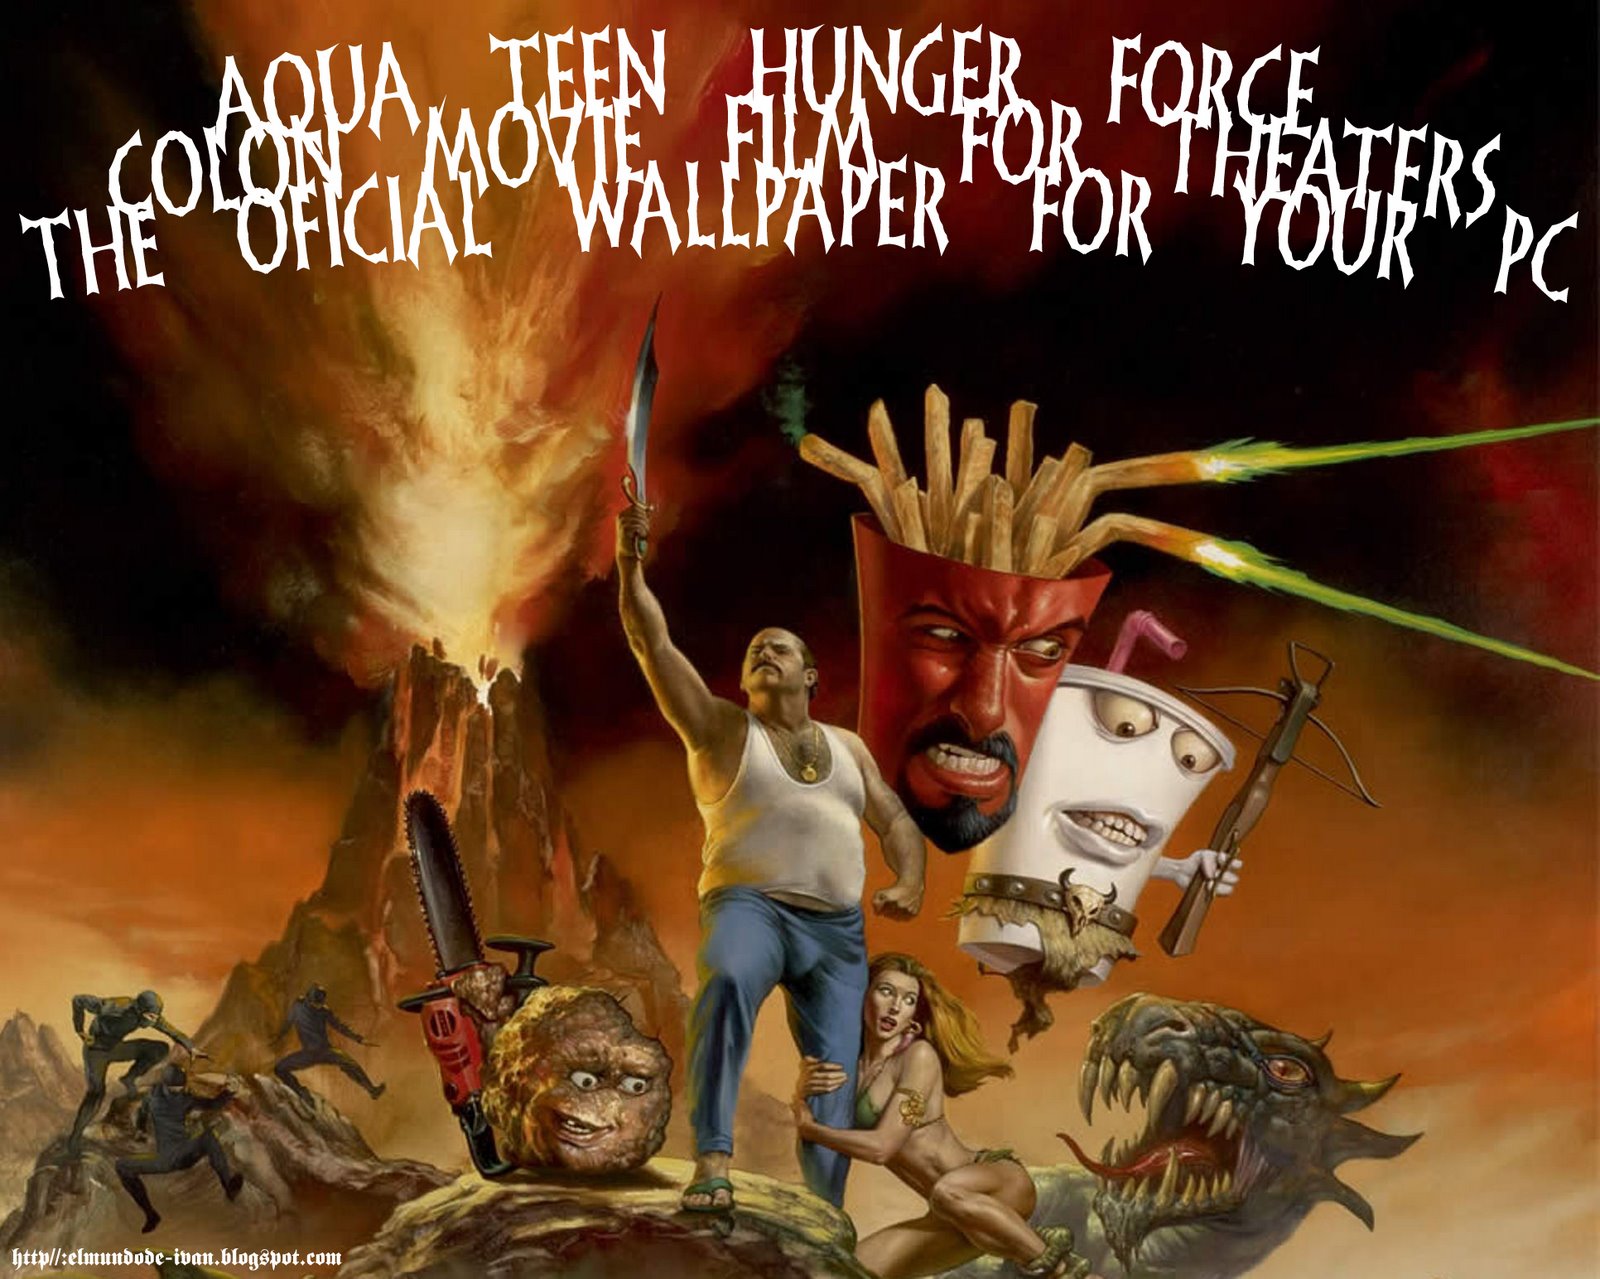 [Aqua+Teen+Hunger+Force+Colon+Movie+Film+For+Theaters+Oficial+Wallpaper+For+Your+PC.jpg]